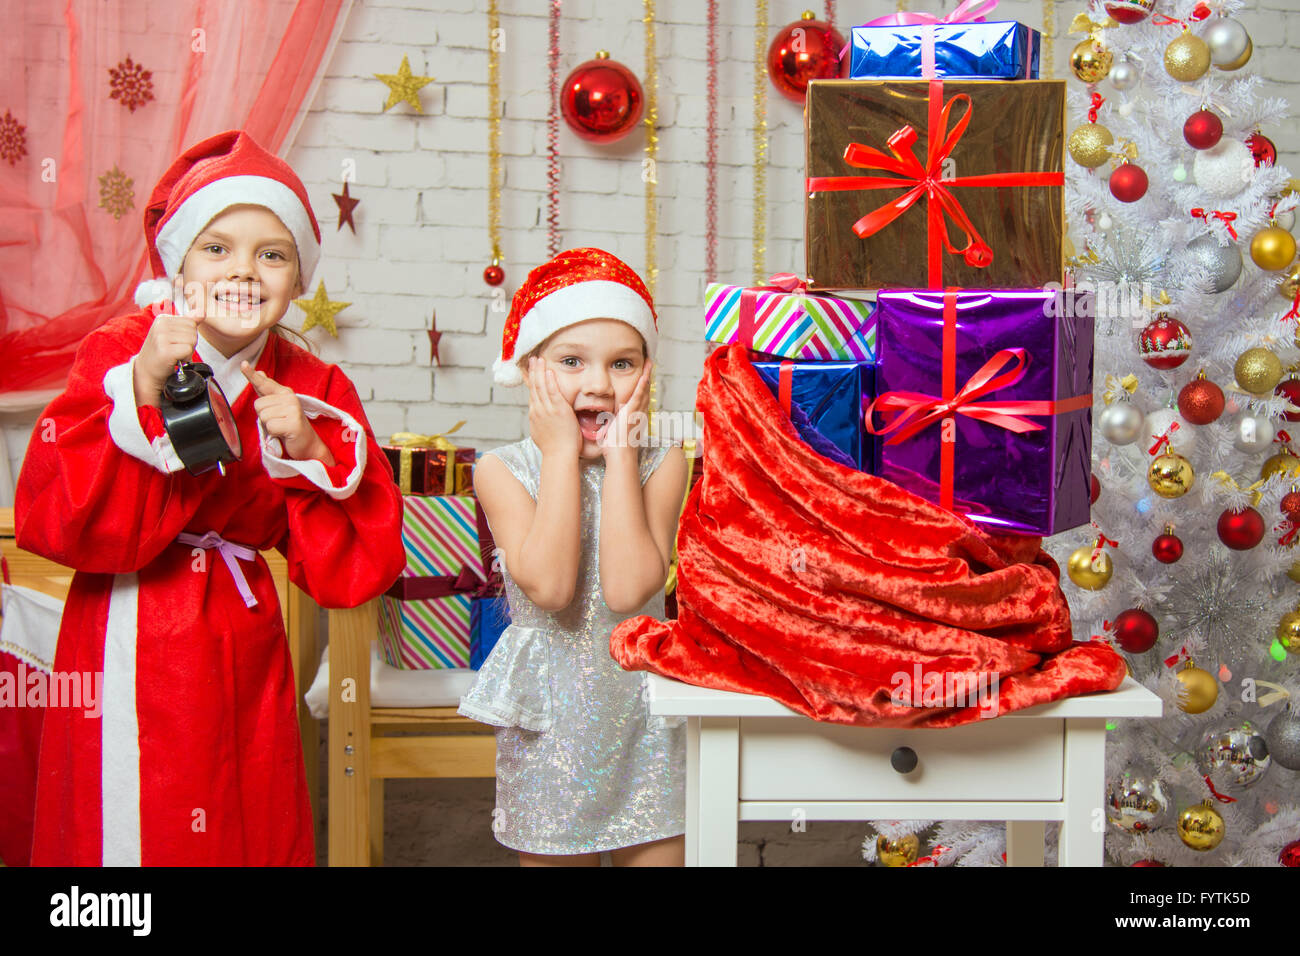 Santa Claus showed the clock Assistant, all the fun smile Stock Photo